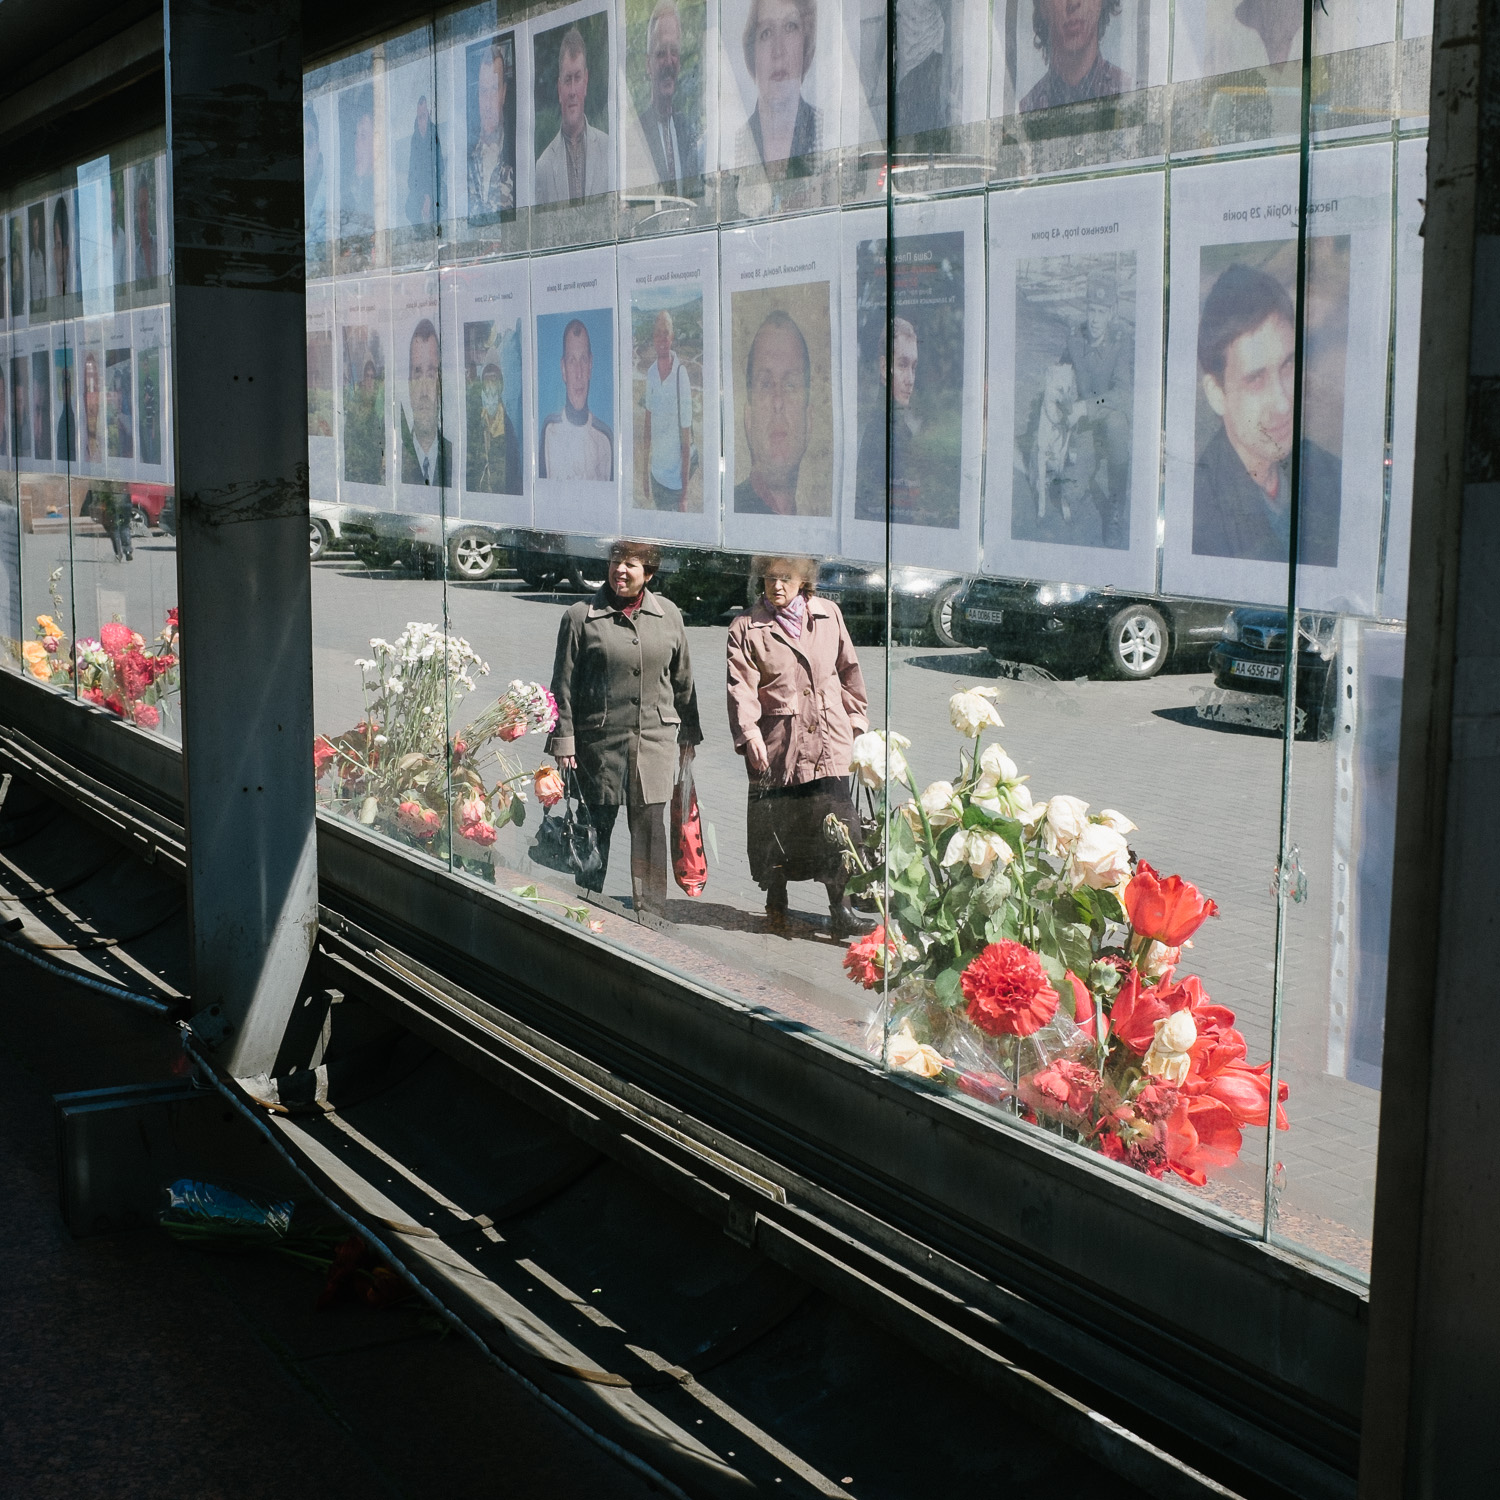  Women walk past a display of pictures of those killed in Ukraine's Euromaidan protests, April 2014. 